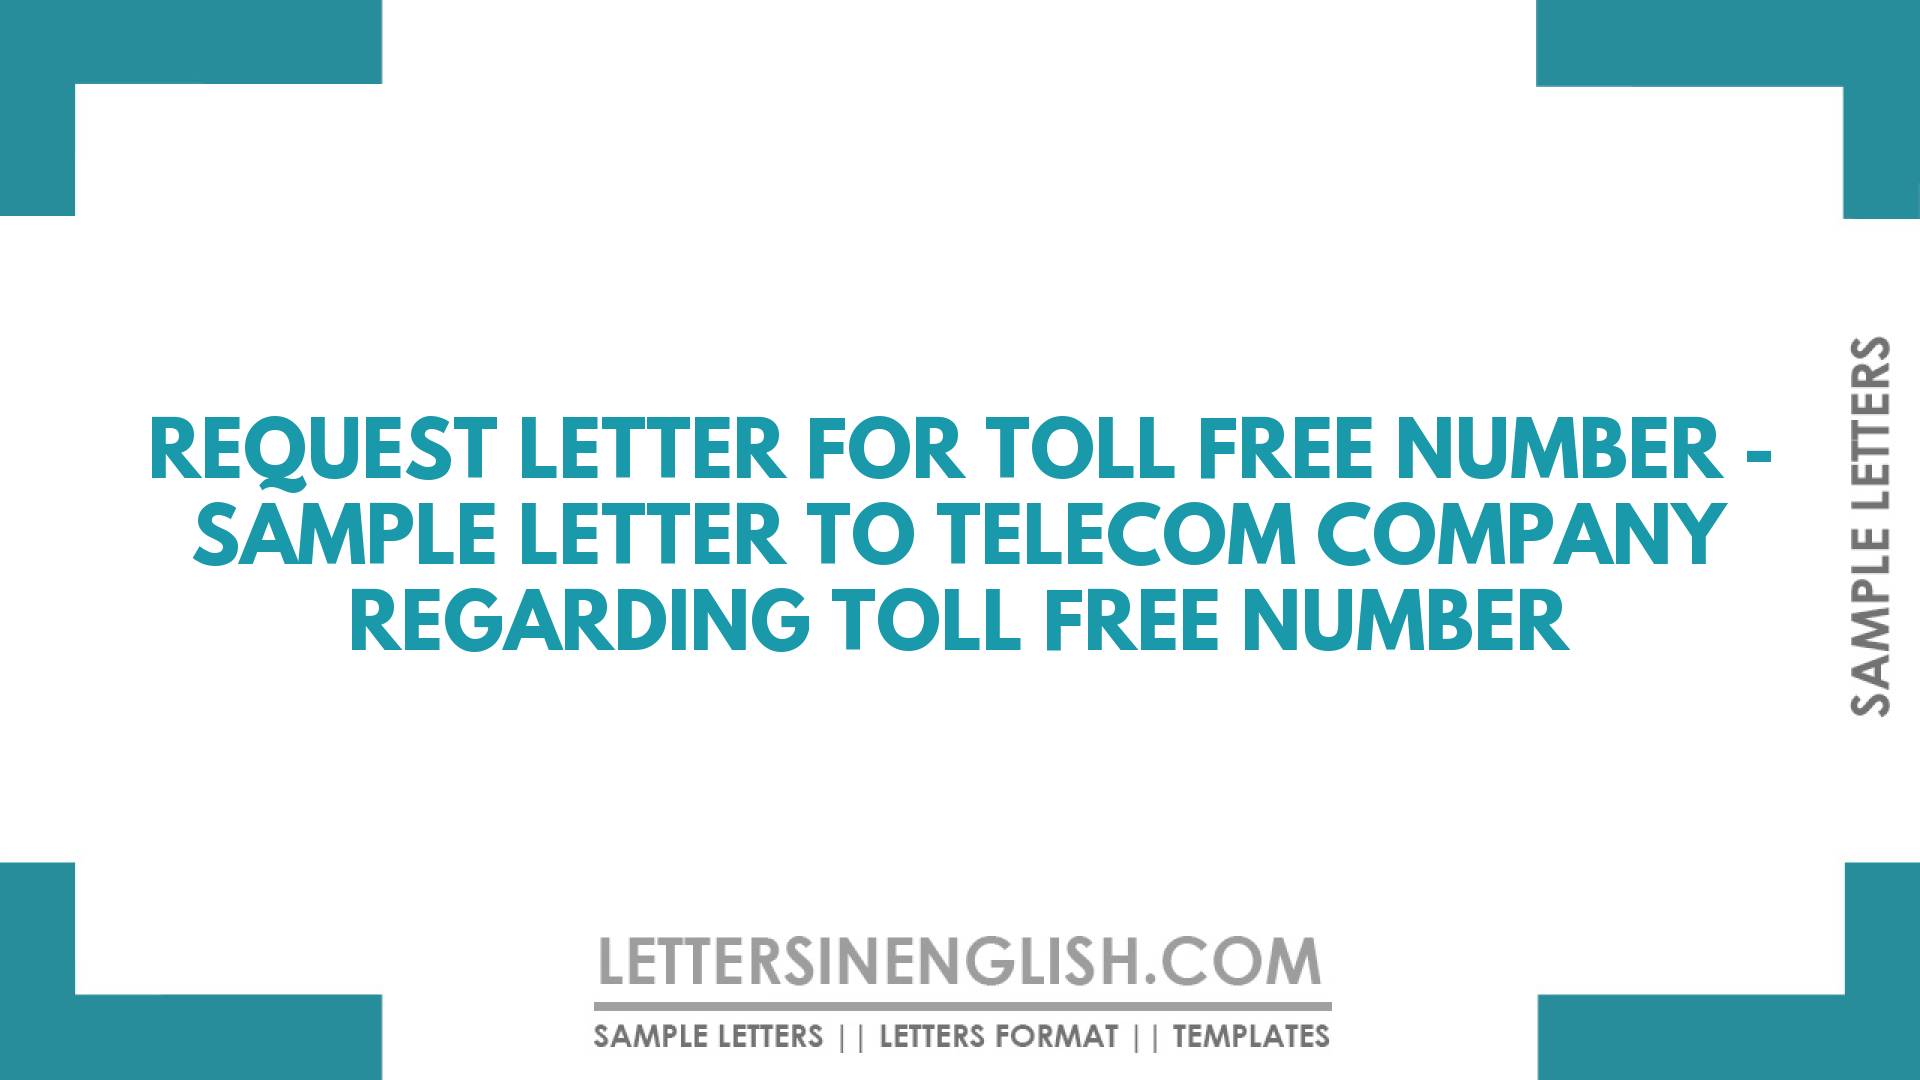 Request Letter for Toll Free Number – Sample Letter to Telecom Company Regarding Toll Free Number